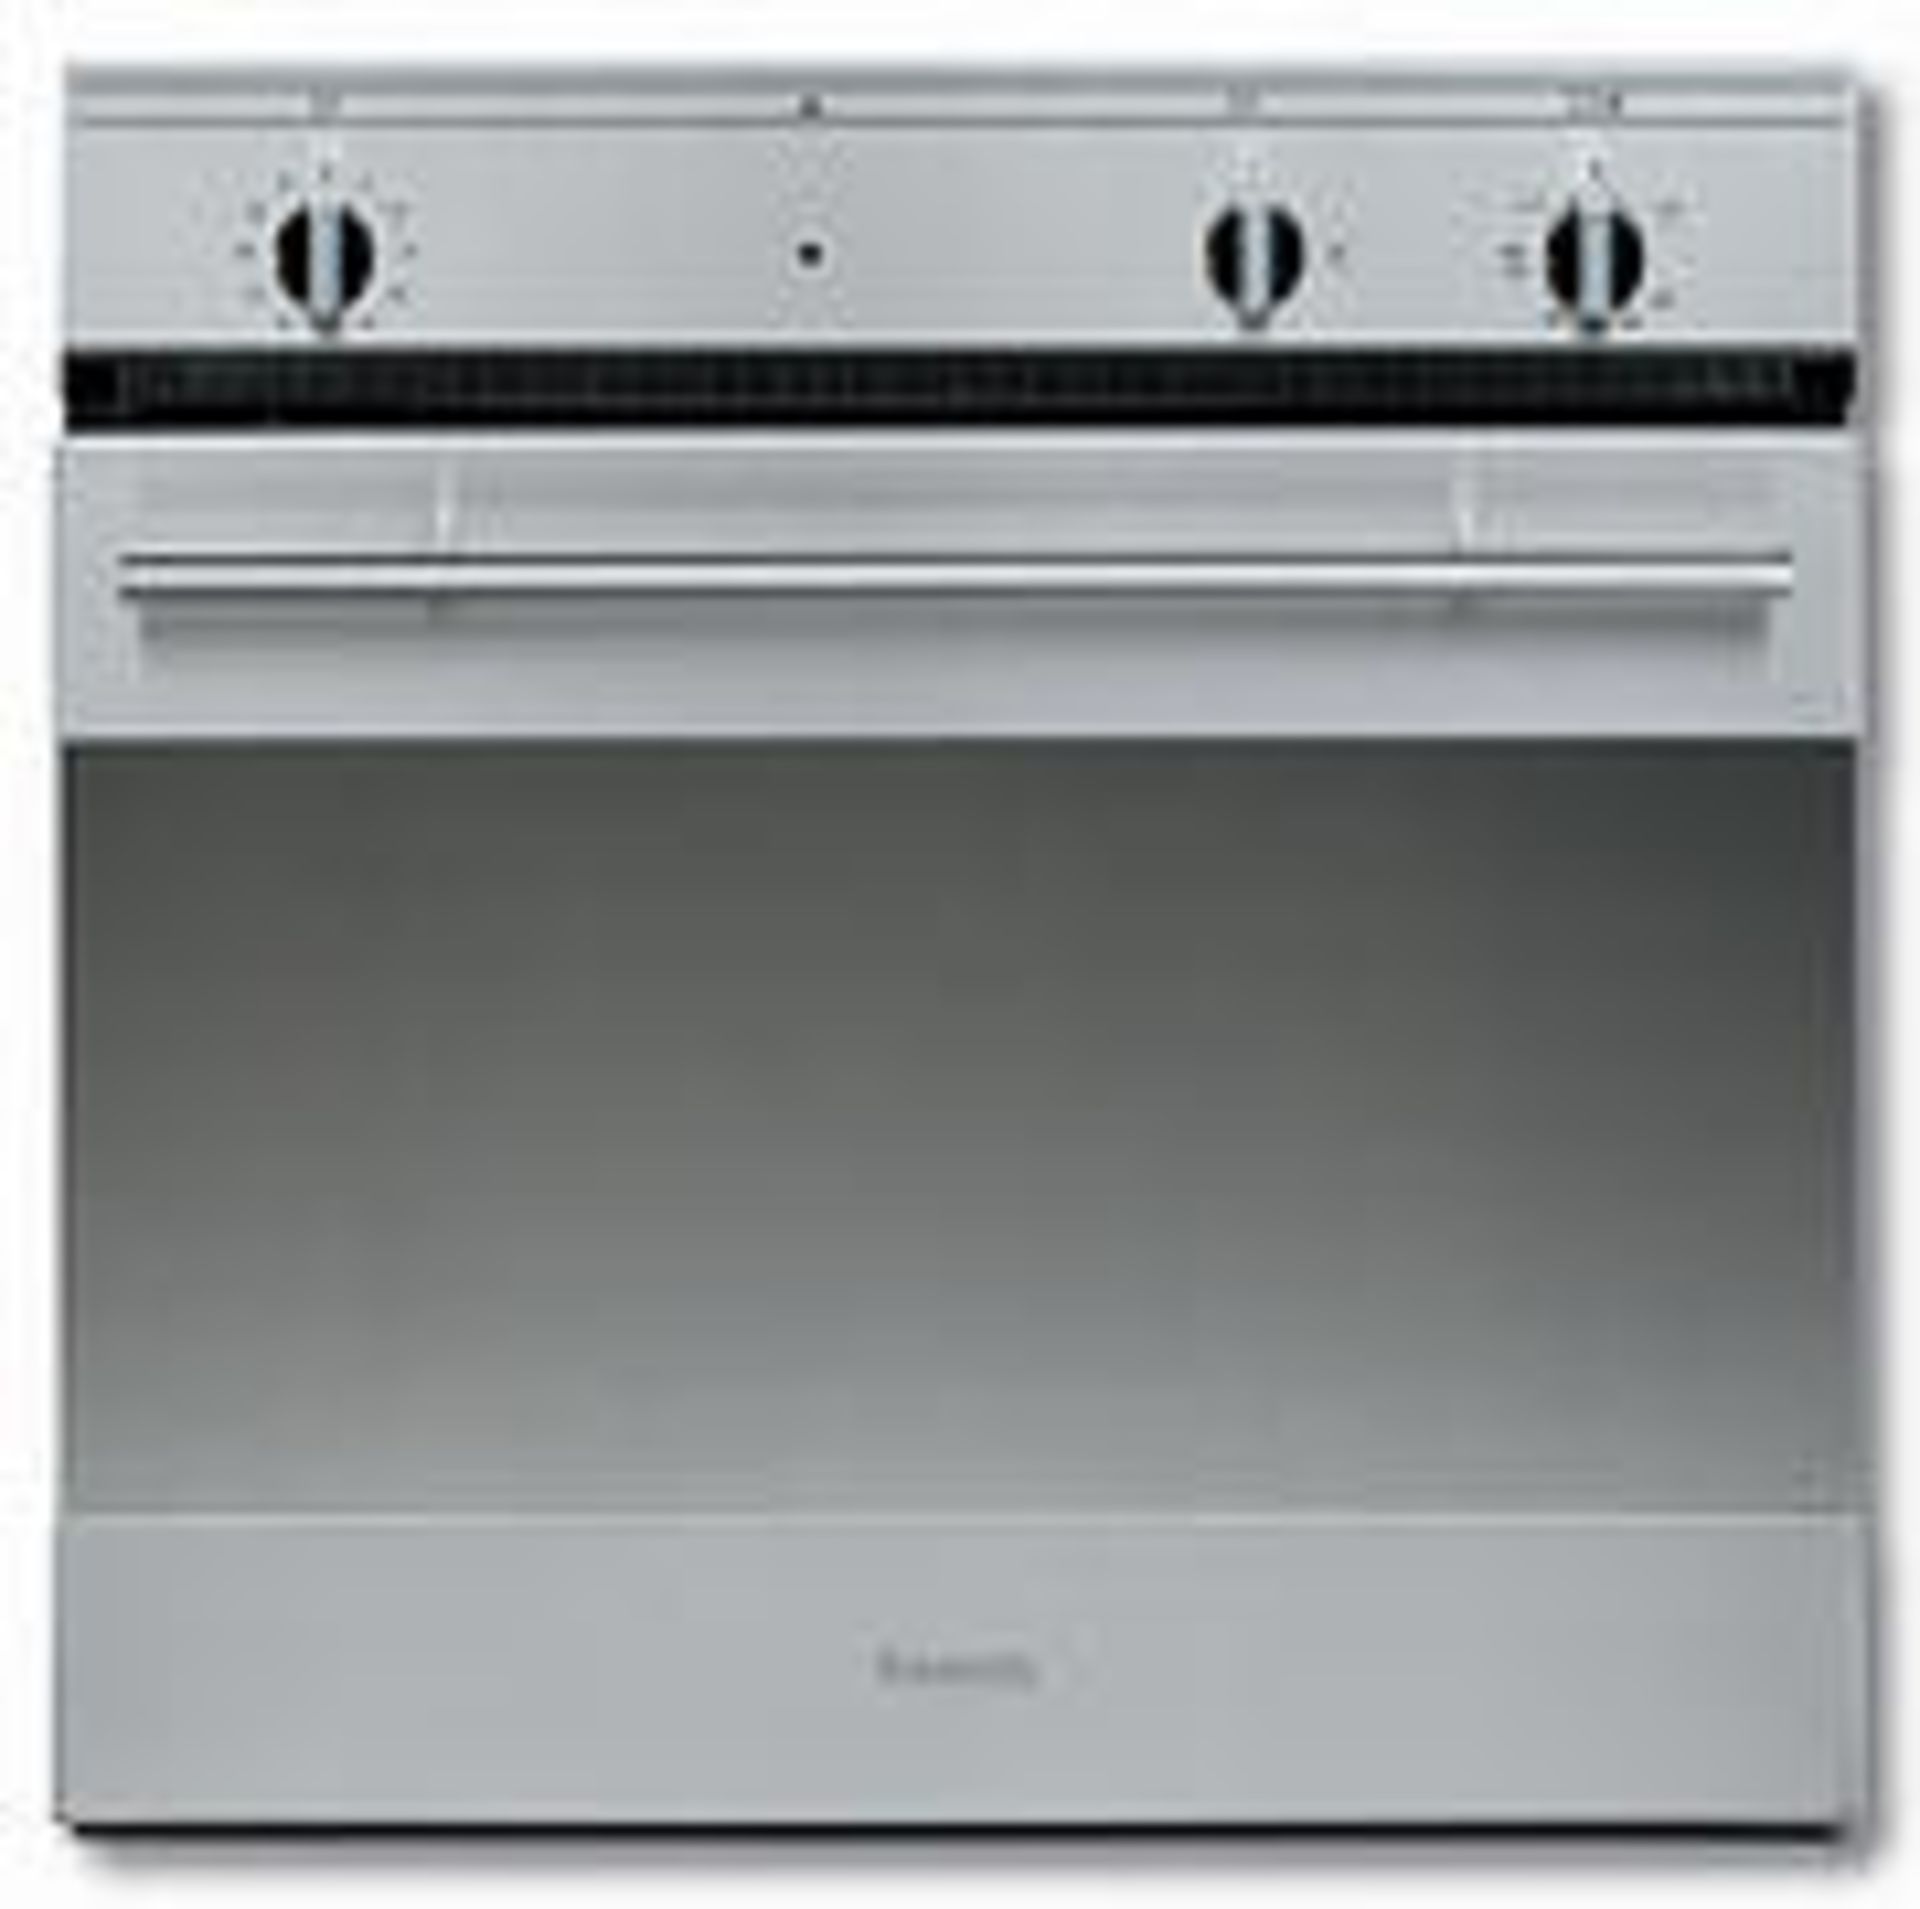 Brand New Boxed Baumatic 60cm Gas Fan Assisted Oven - Stainless Steel RRP £299